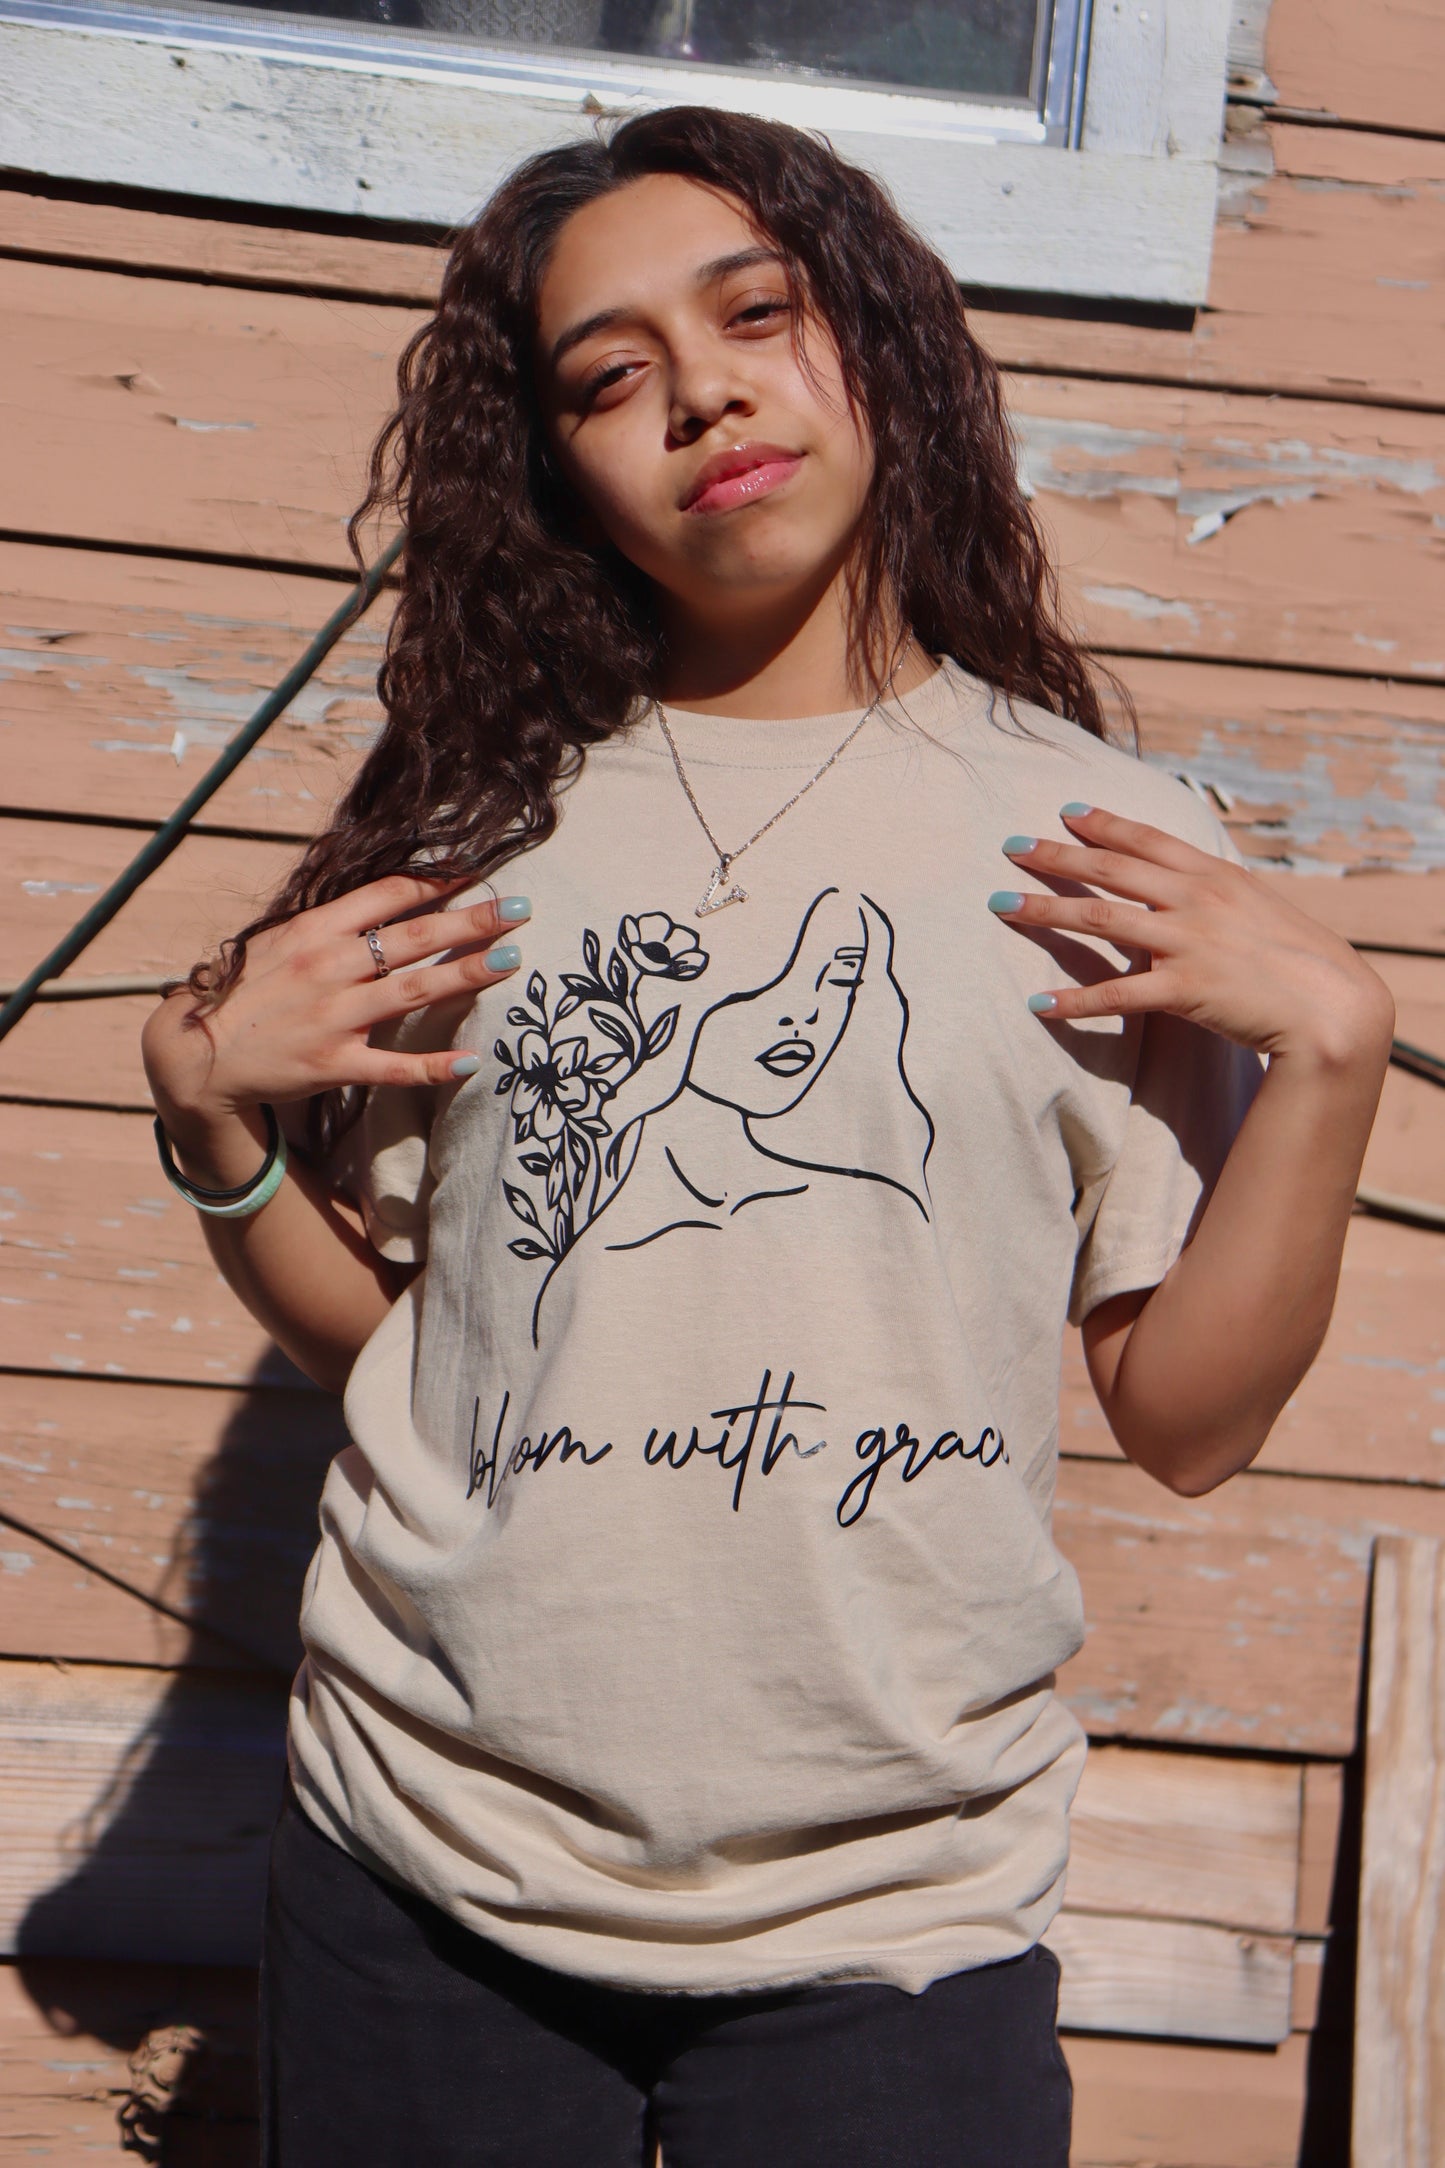 Bloom with Grace  Shirt